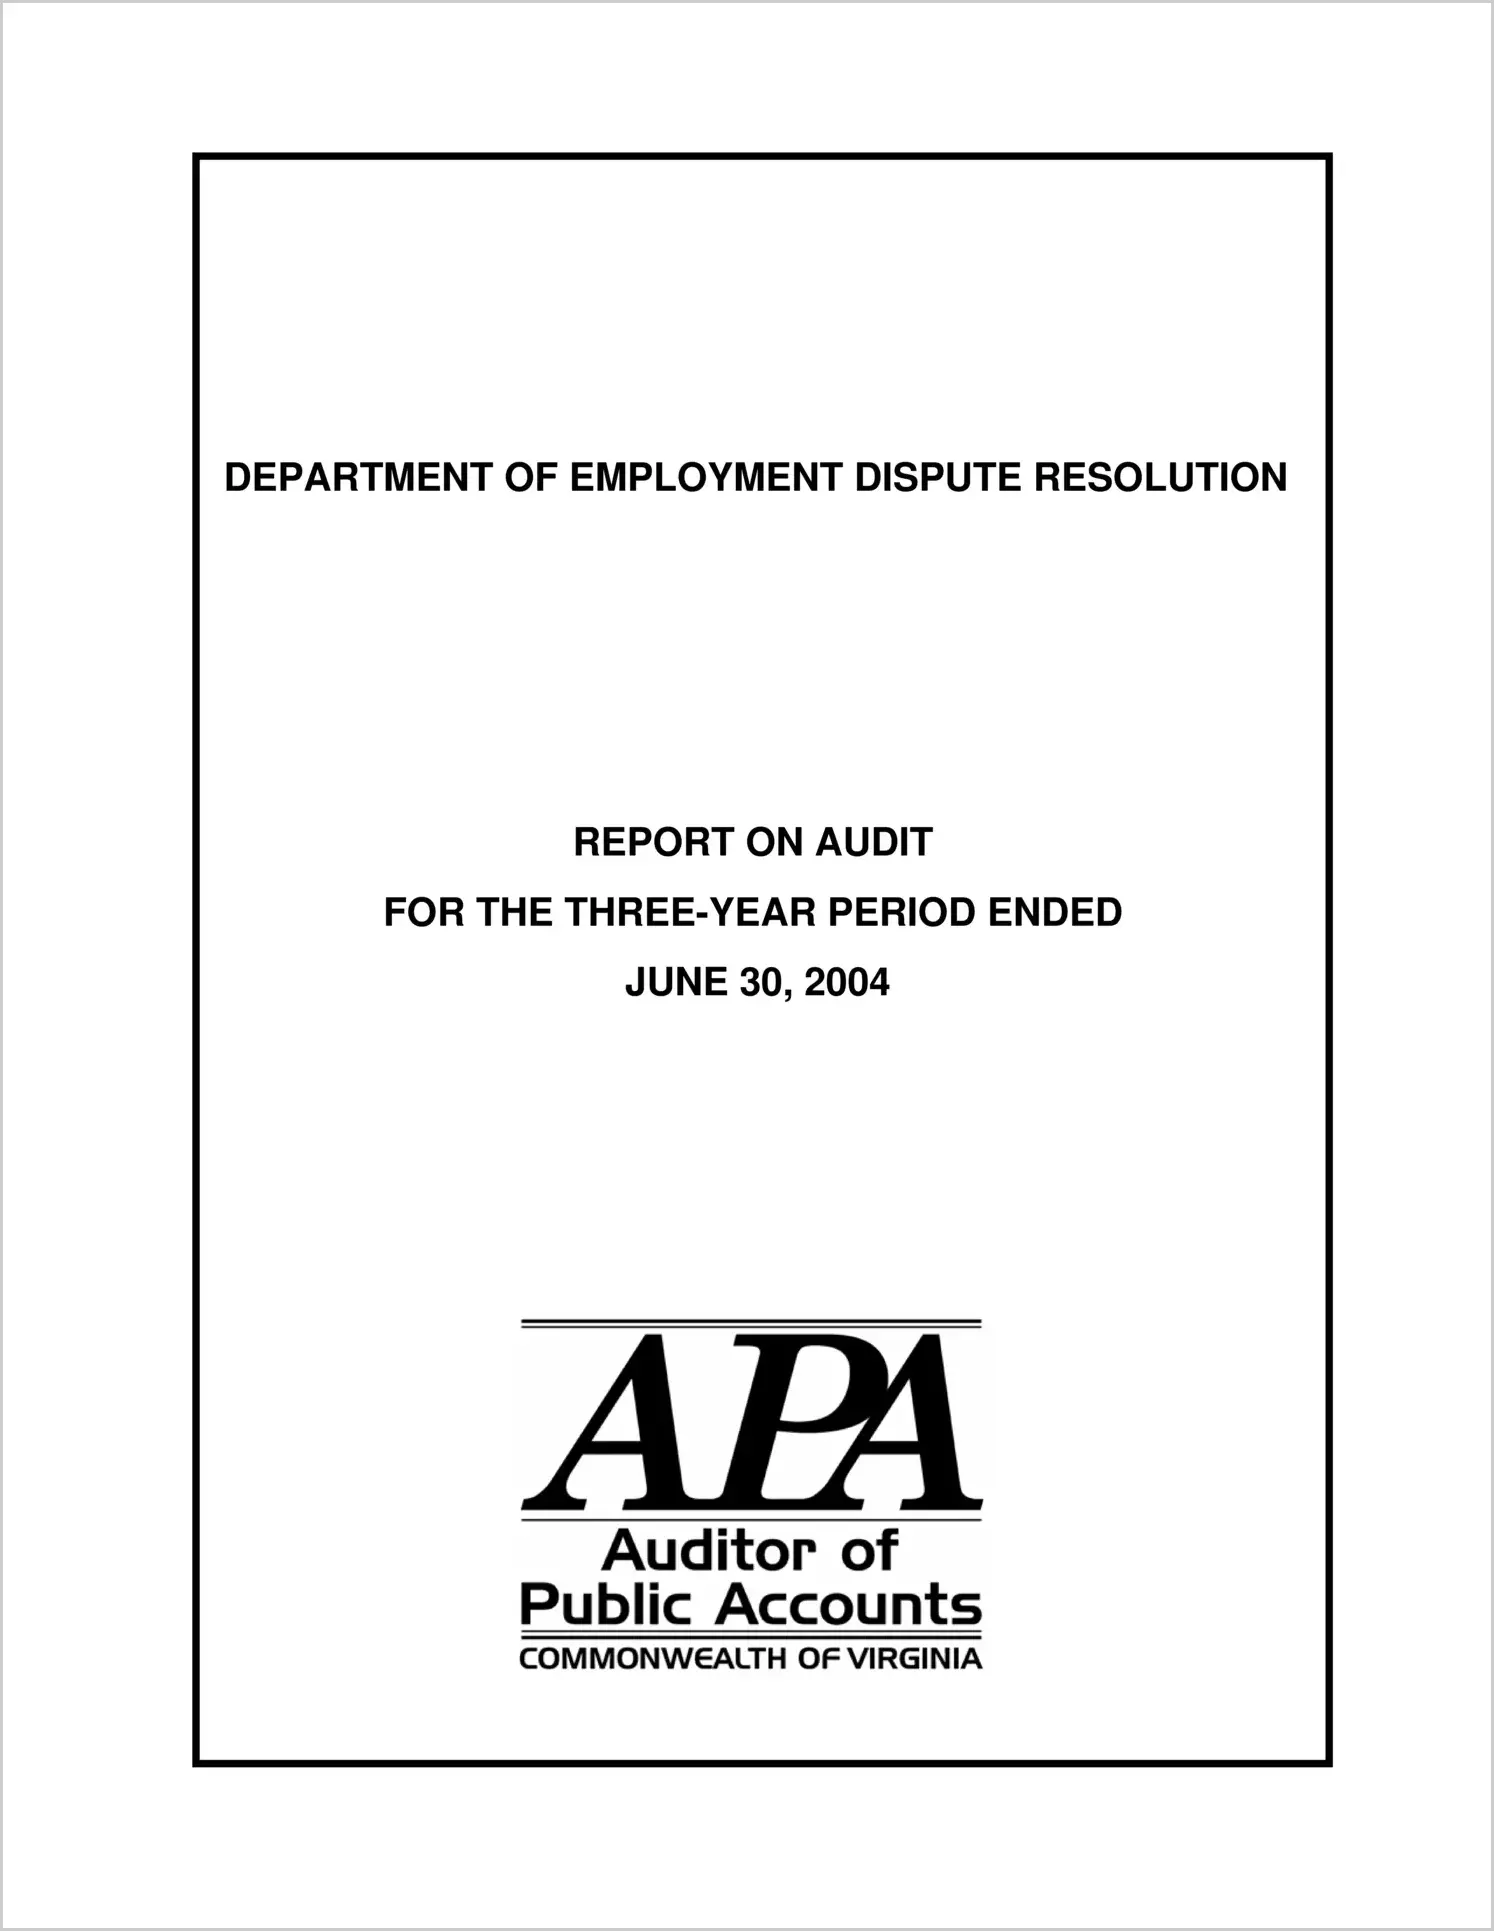 Department of Employment Dispute Resolution for the three-year period ended June 30, 2004